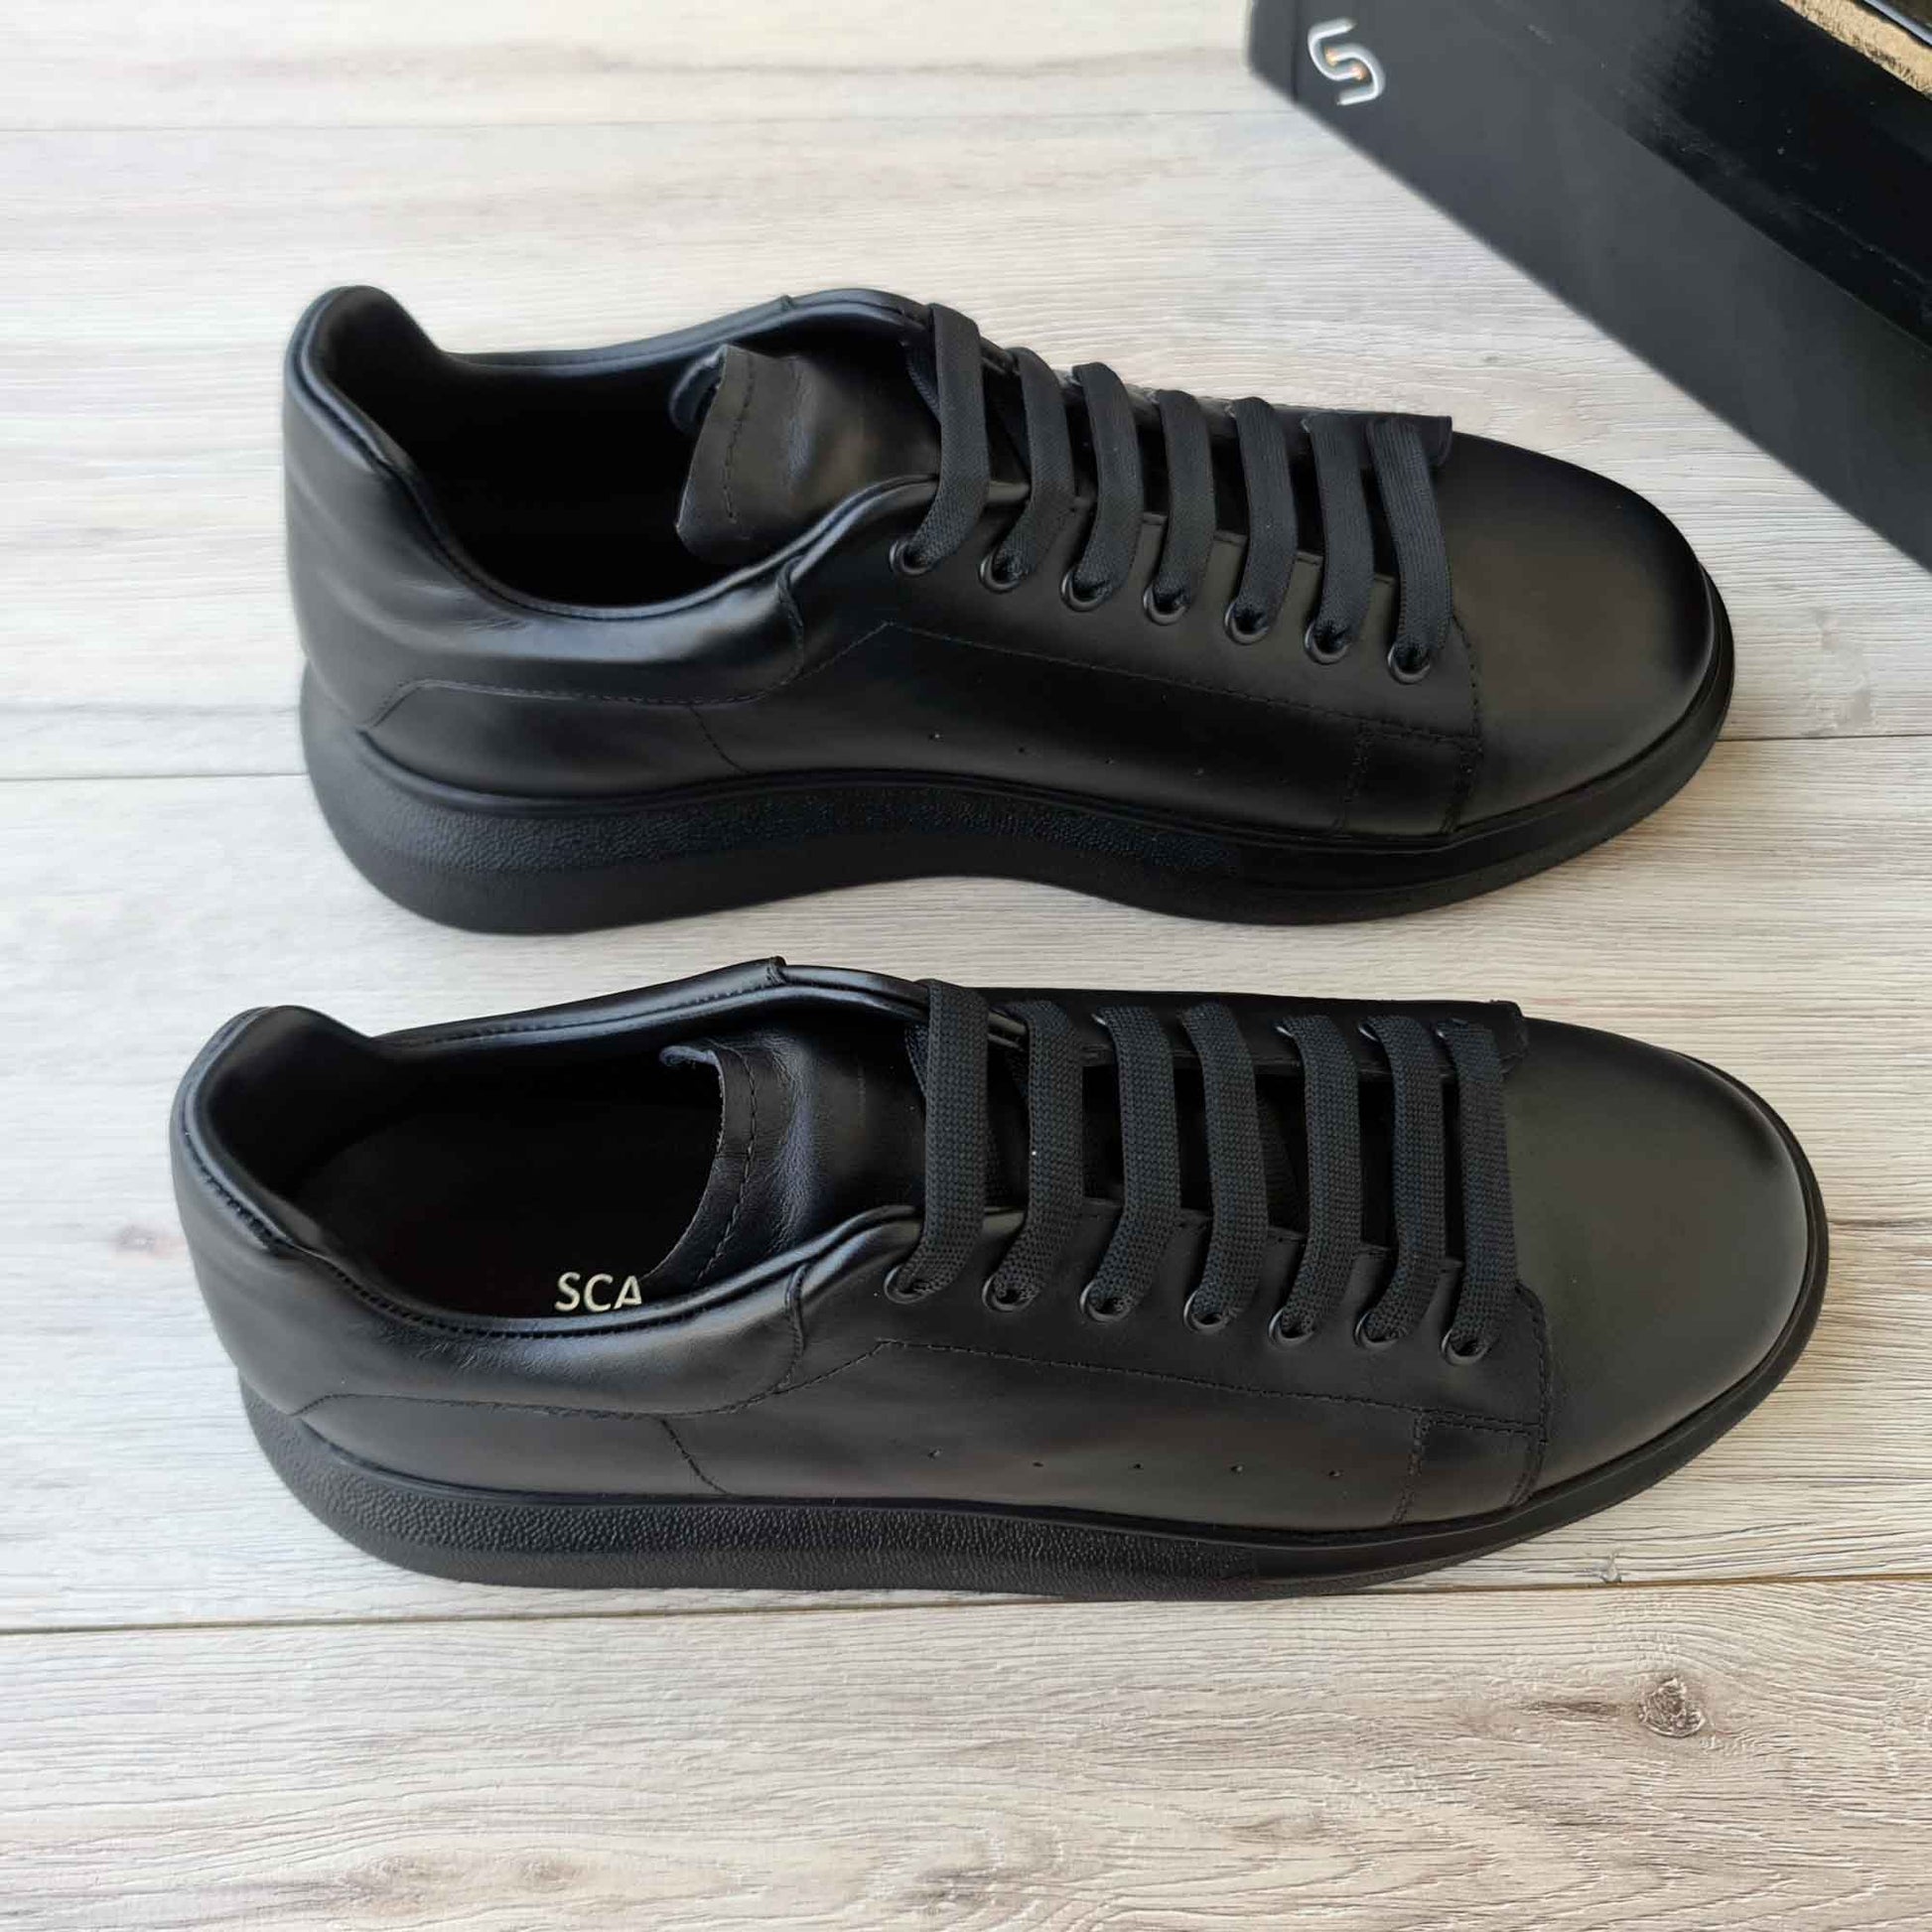 Lift Black Soft Genuine Leather Sneakers | Platform High Sole